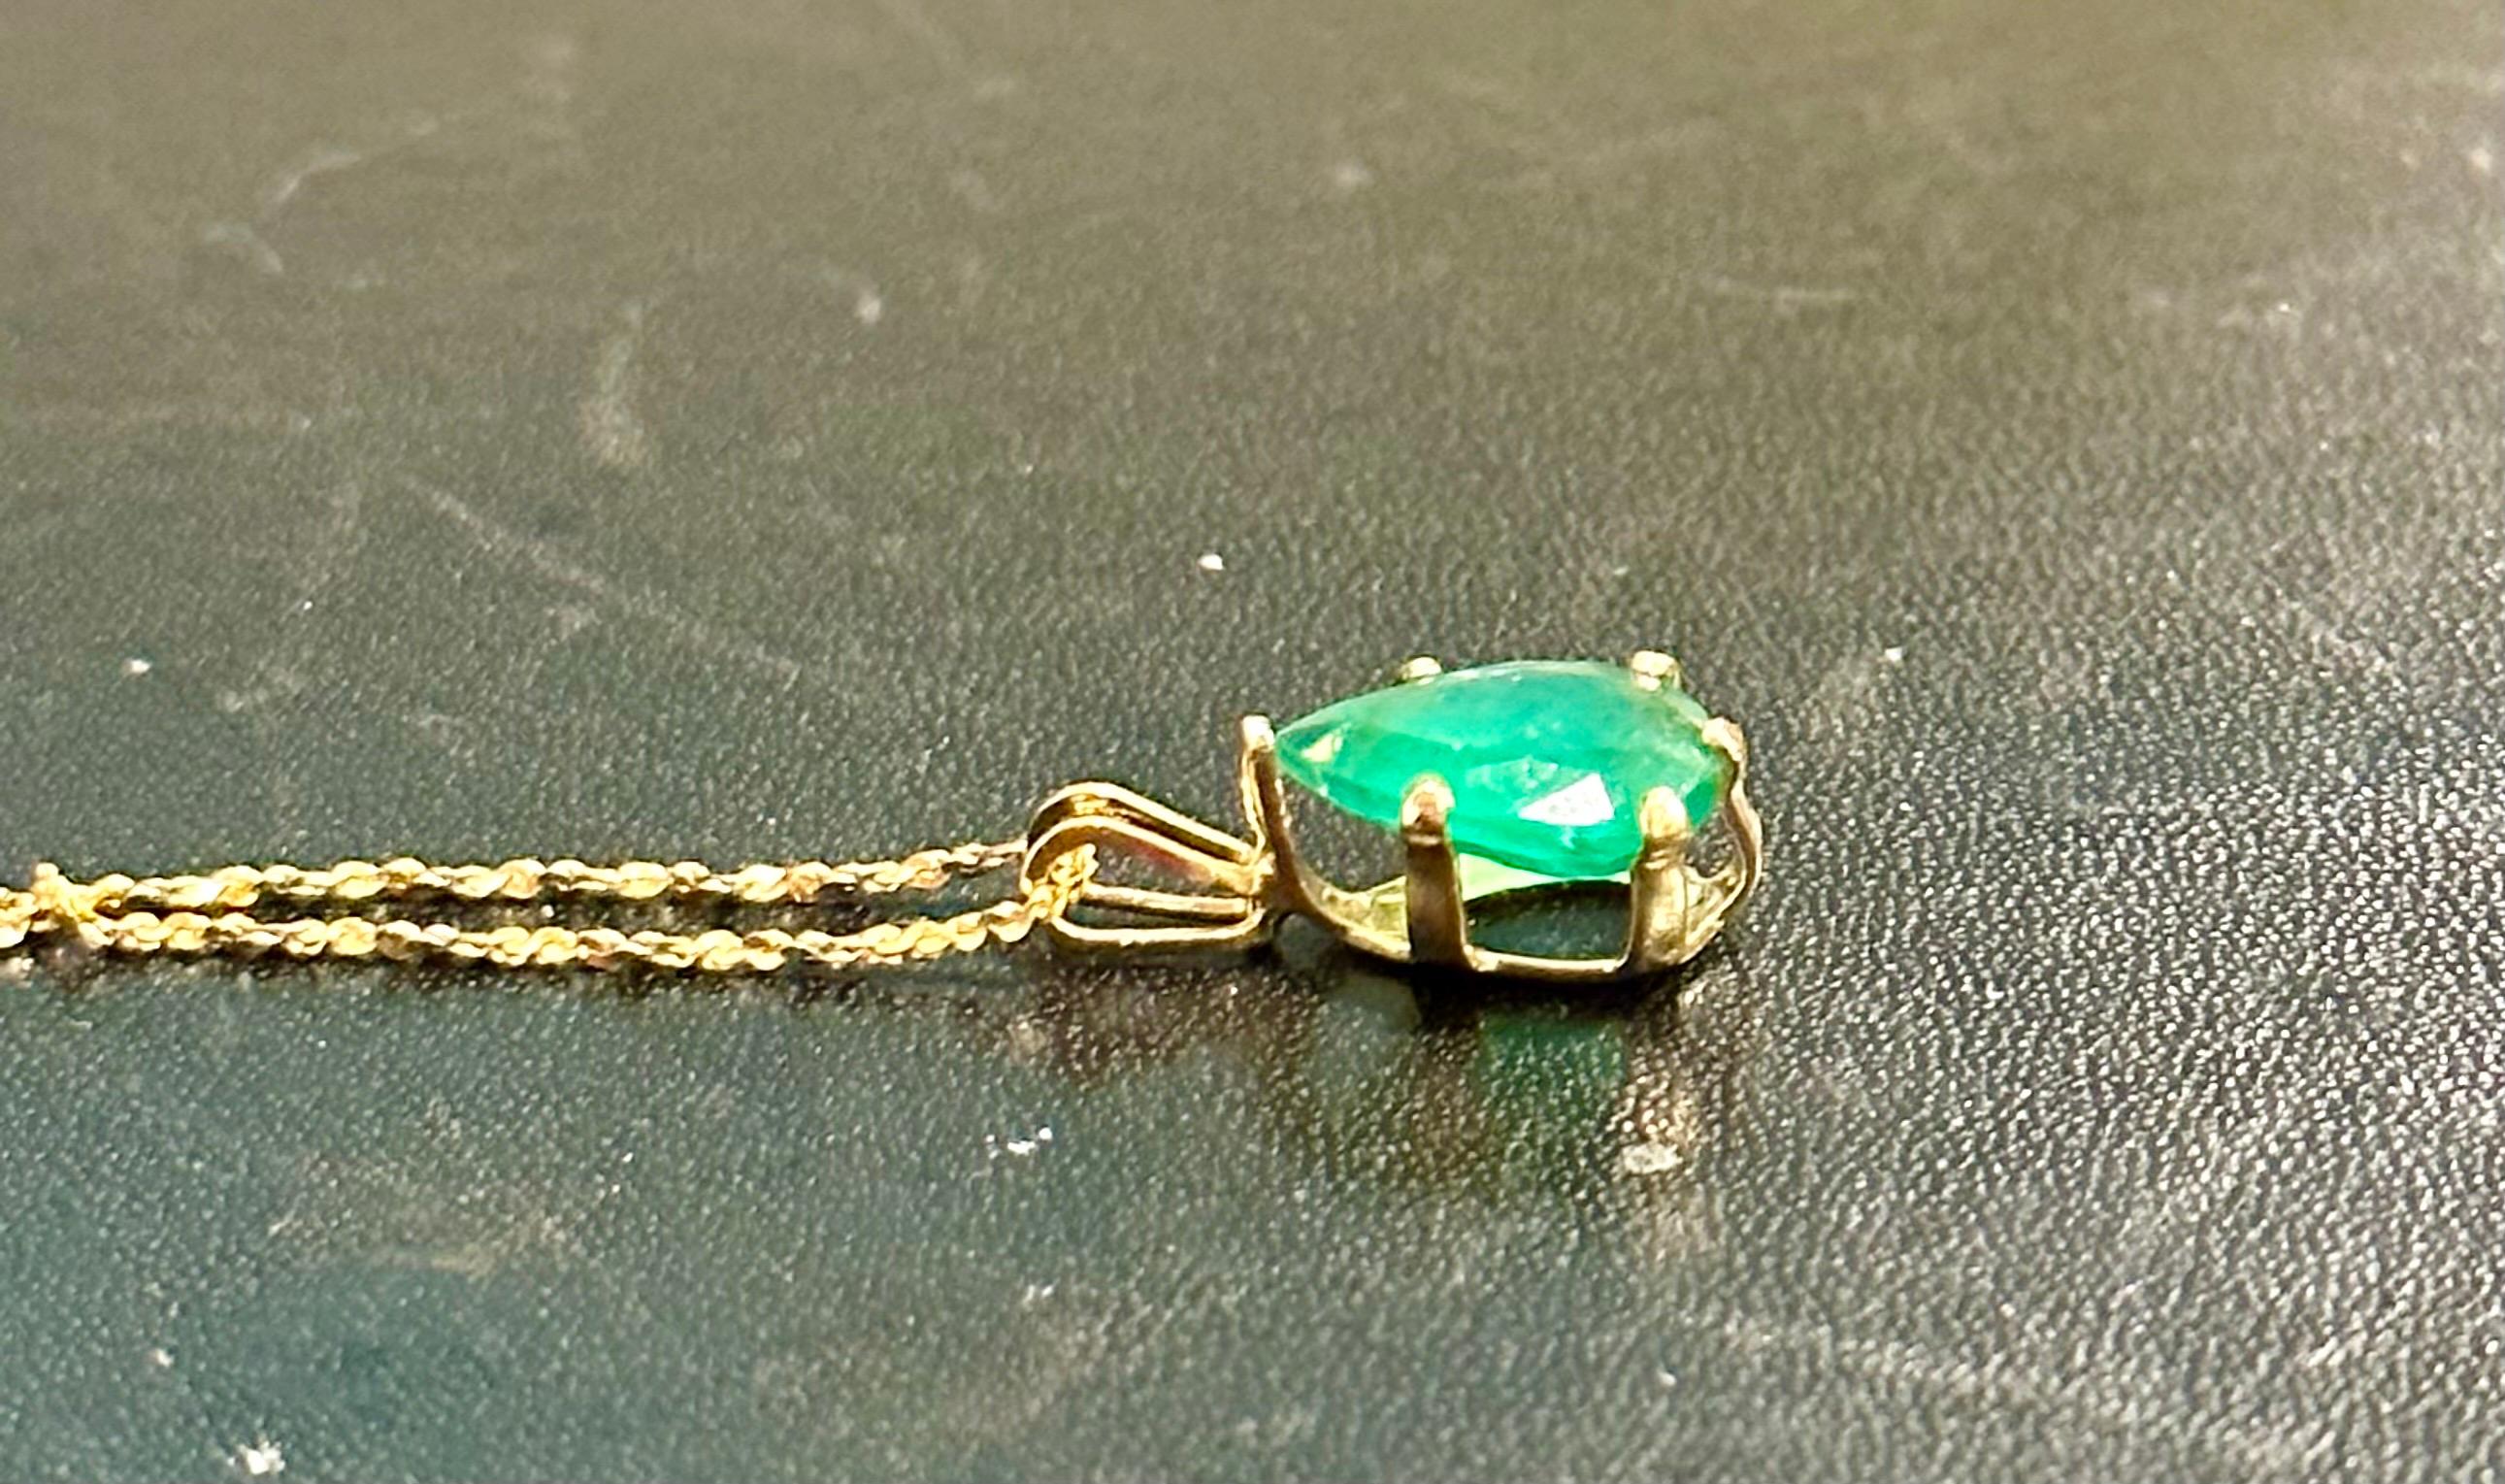 Approximately 2.25 Ct Natural Emerald Zambian emerald  Pendant 14 Karat Yellow  Gold  with Chain

 Emerald is about 2,25 carat 
Very desirable color and quality. Extreme fine color and clarity.
comes  in  a 14 Karat Yellow gold chain  stamped on